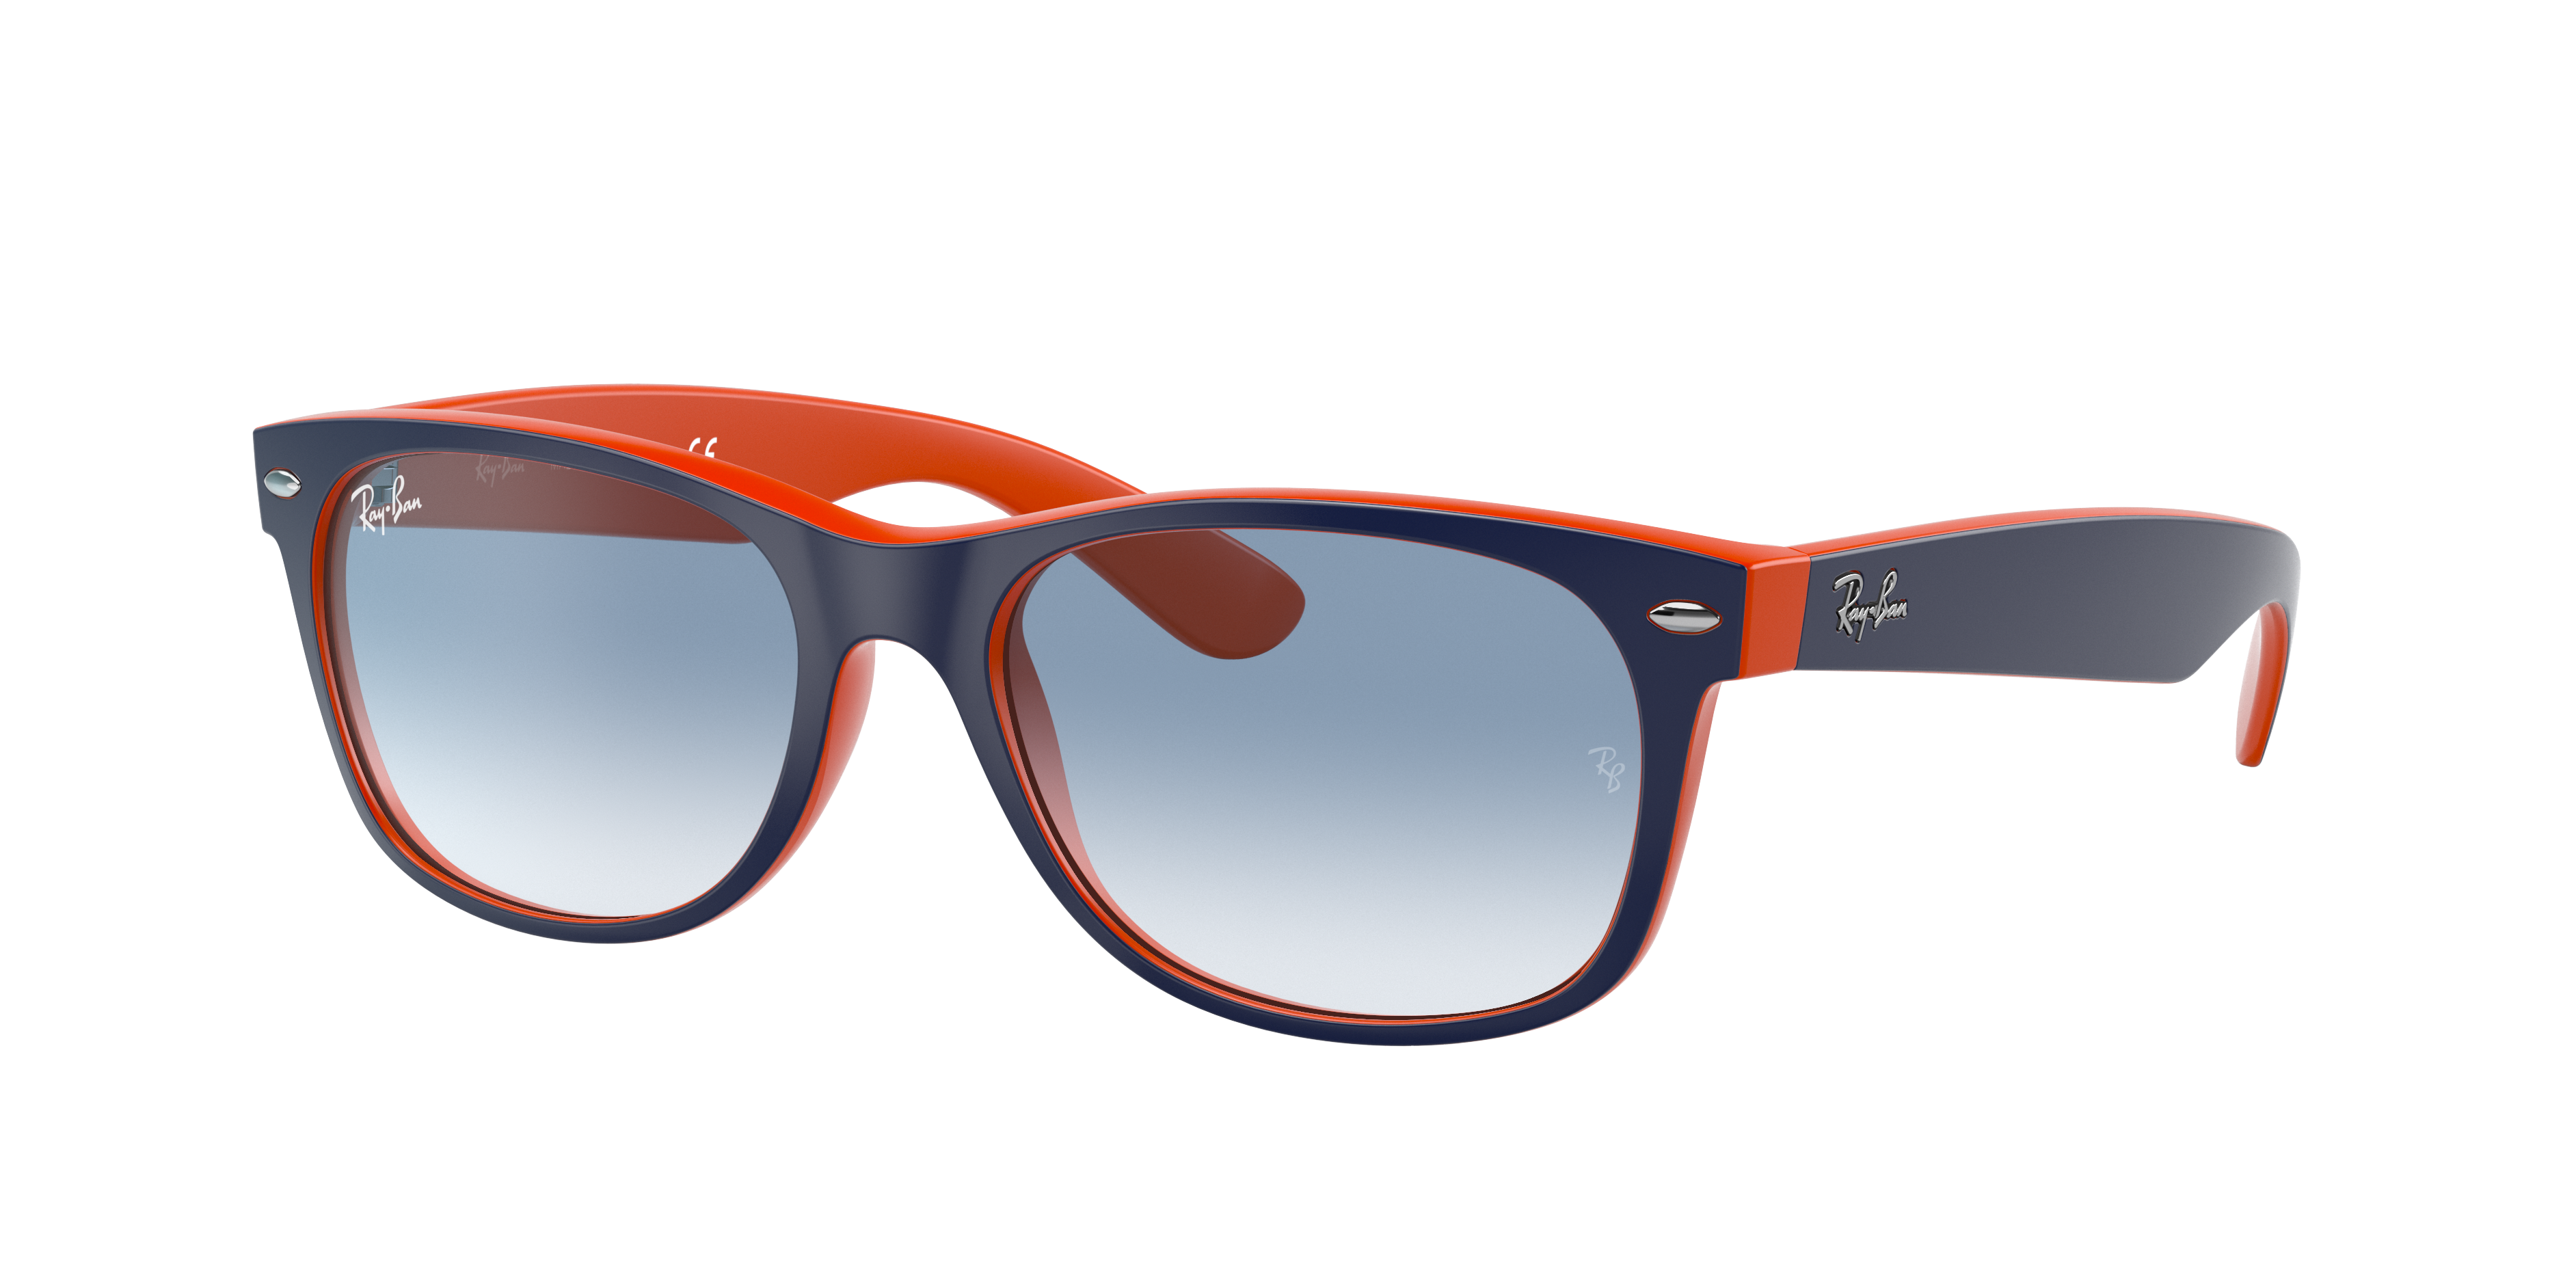 New Wayfarer Color Mix Sunglasses in Blue On Orange and Light Blue | Ray-Ban ®